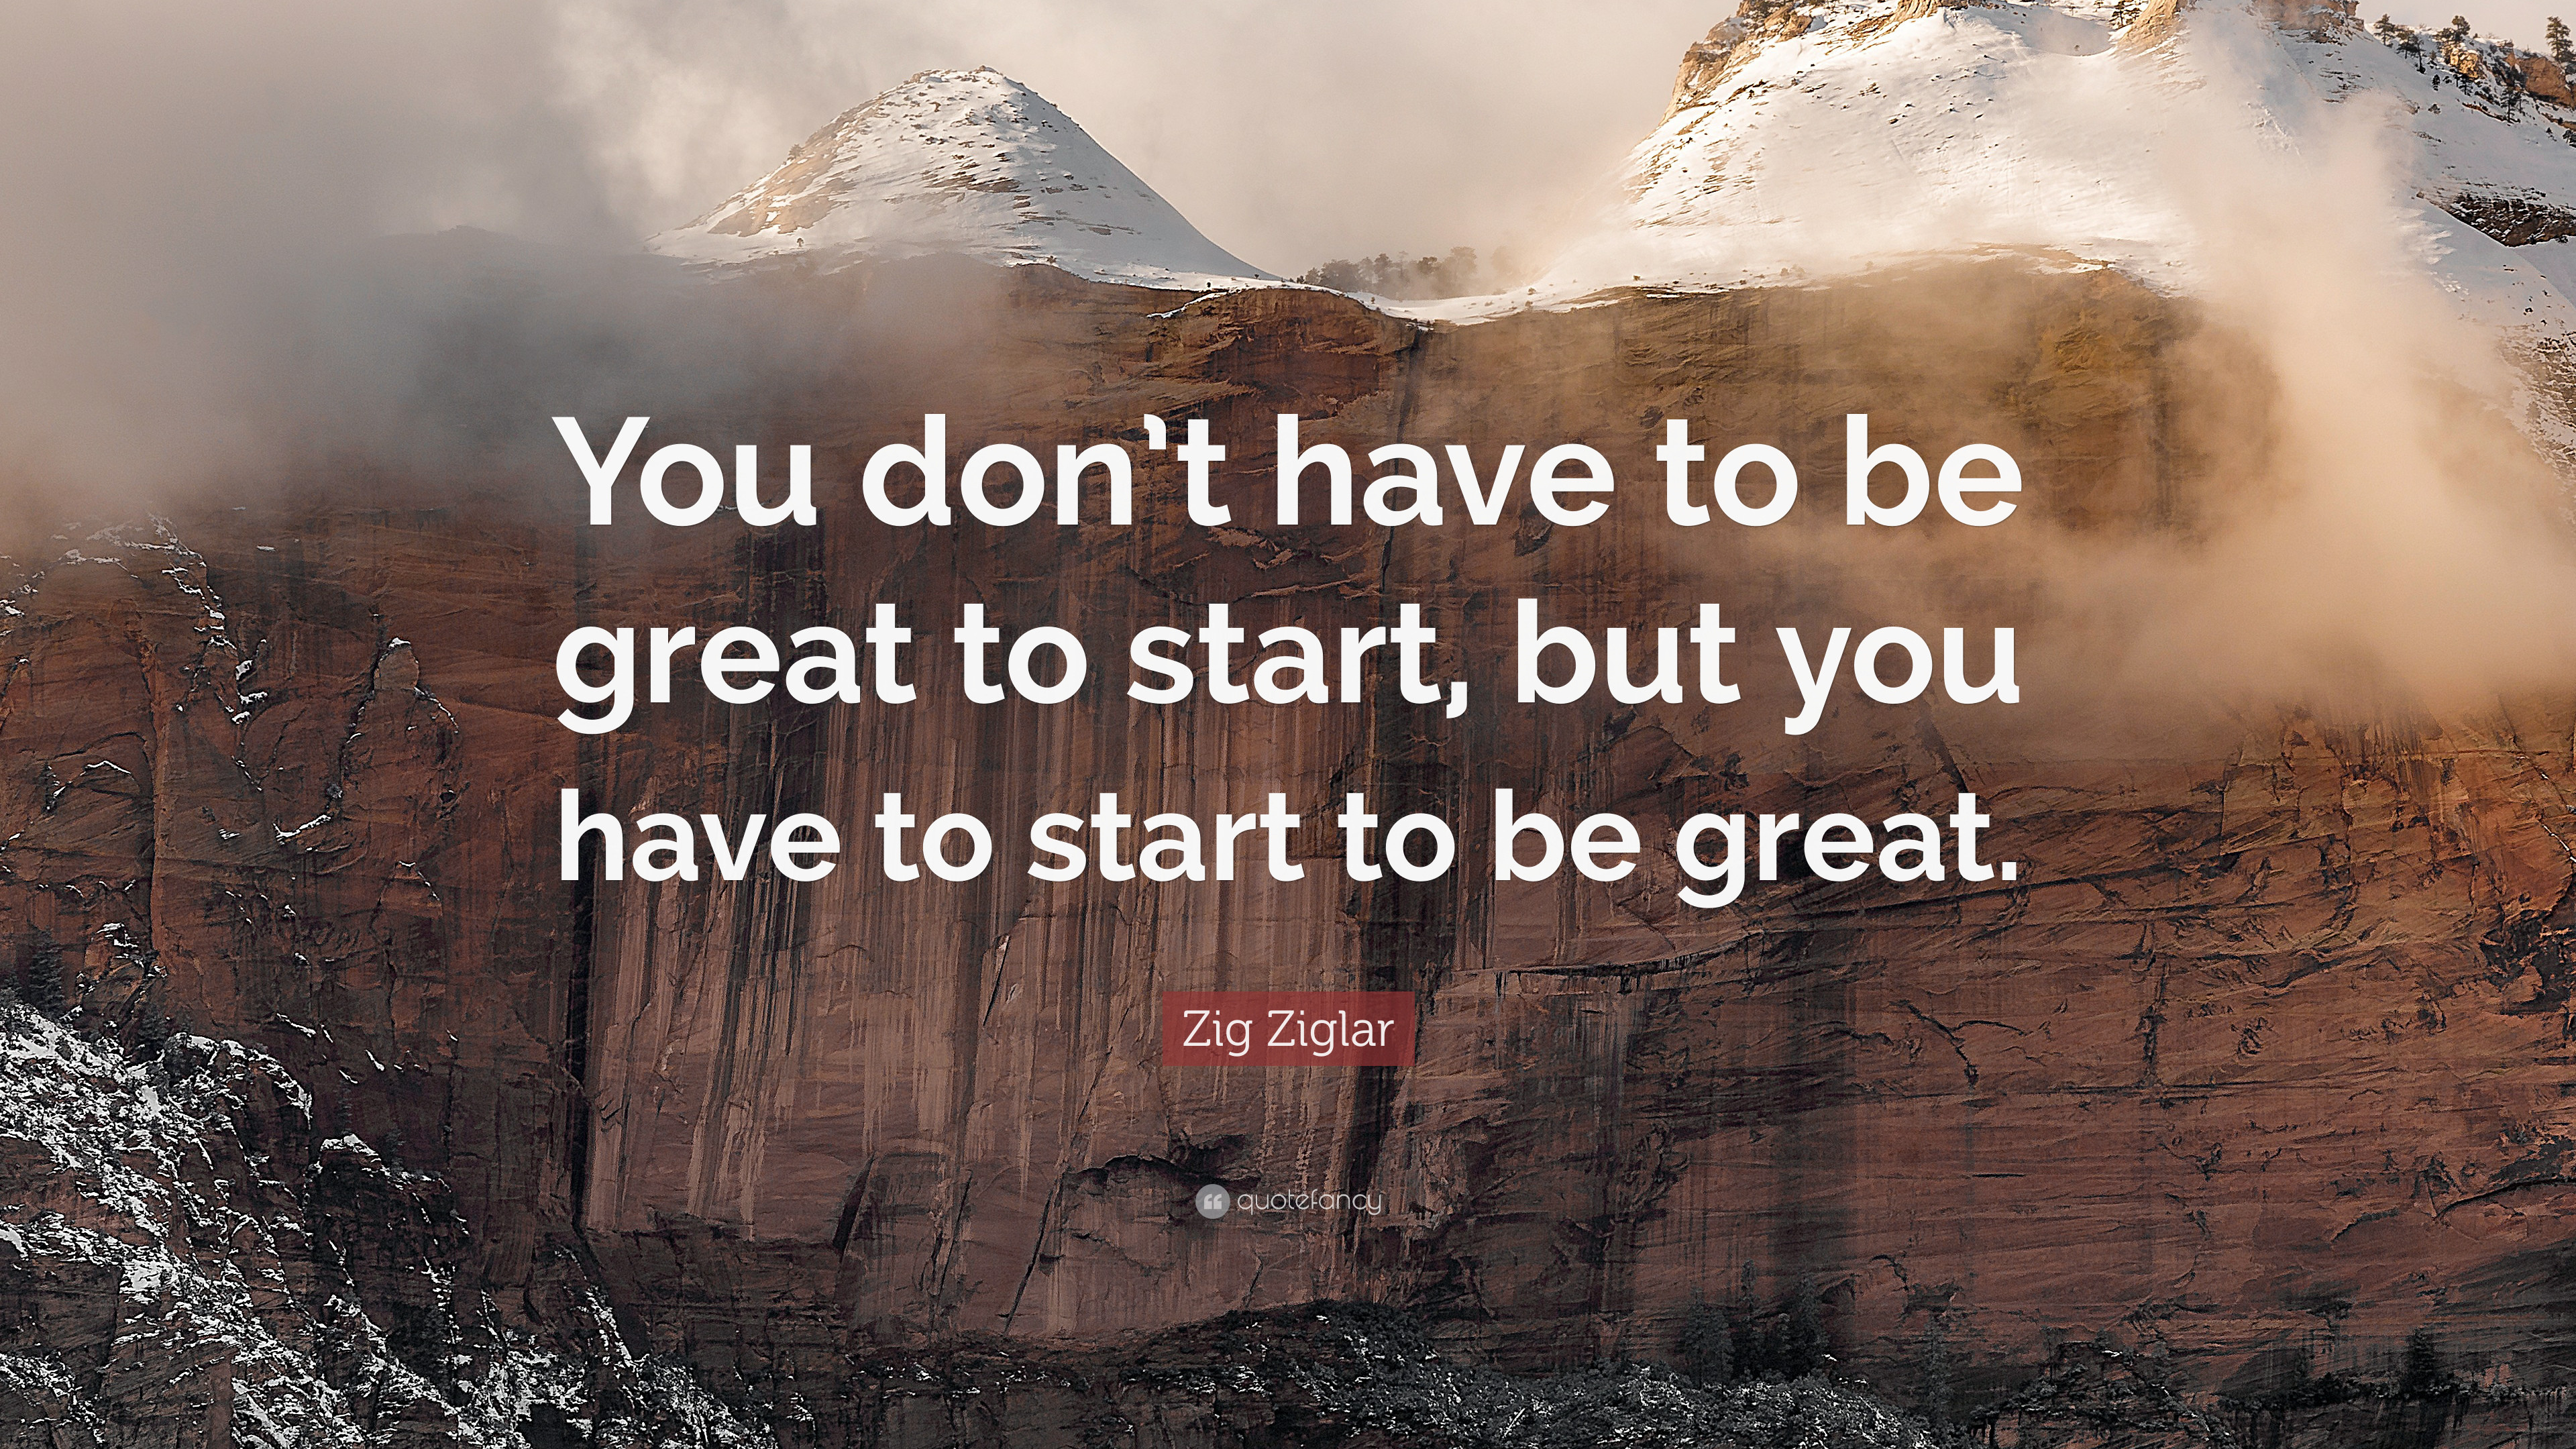 3840x2160 Motivational Workout Quotes: “You don't have to be great to start,